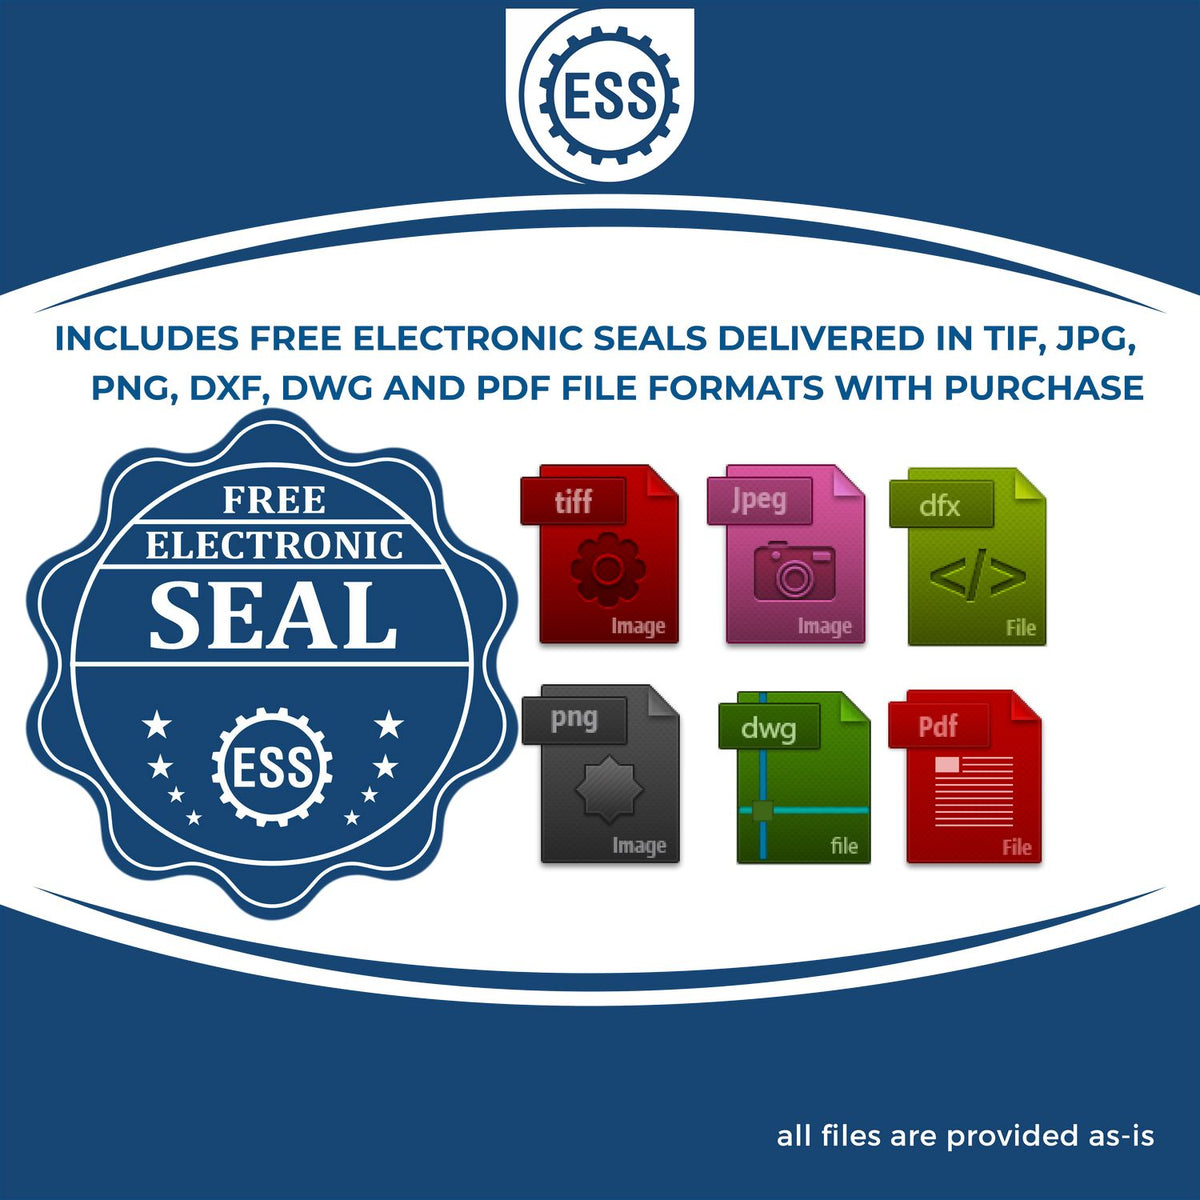 An infographic for the free electronic seal for the Extended Long Reach Mississippi Surveyor Embosser illustrating the different file type icons such as DXF, DWG, TIF, JPG and PNG.